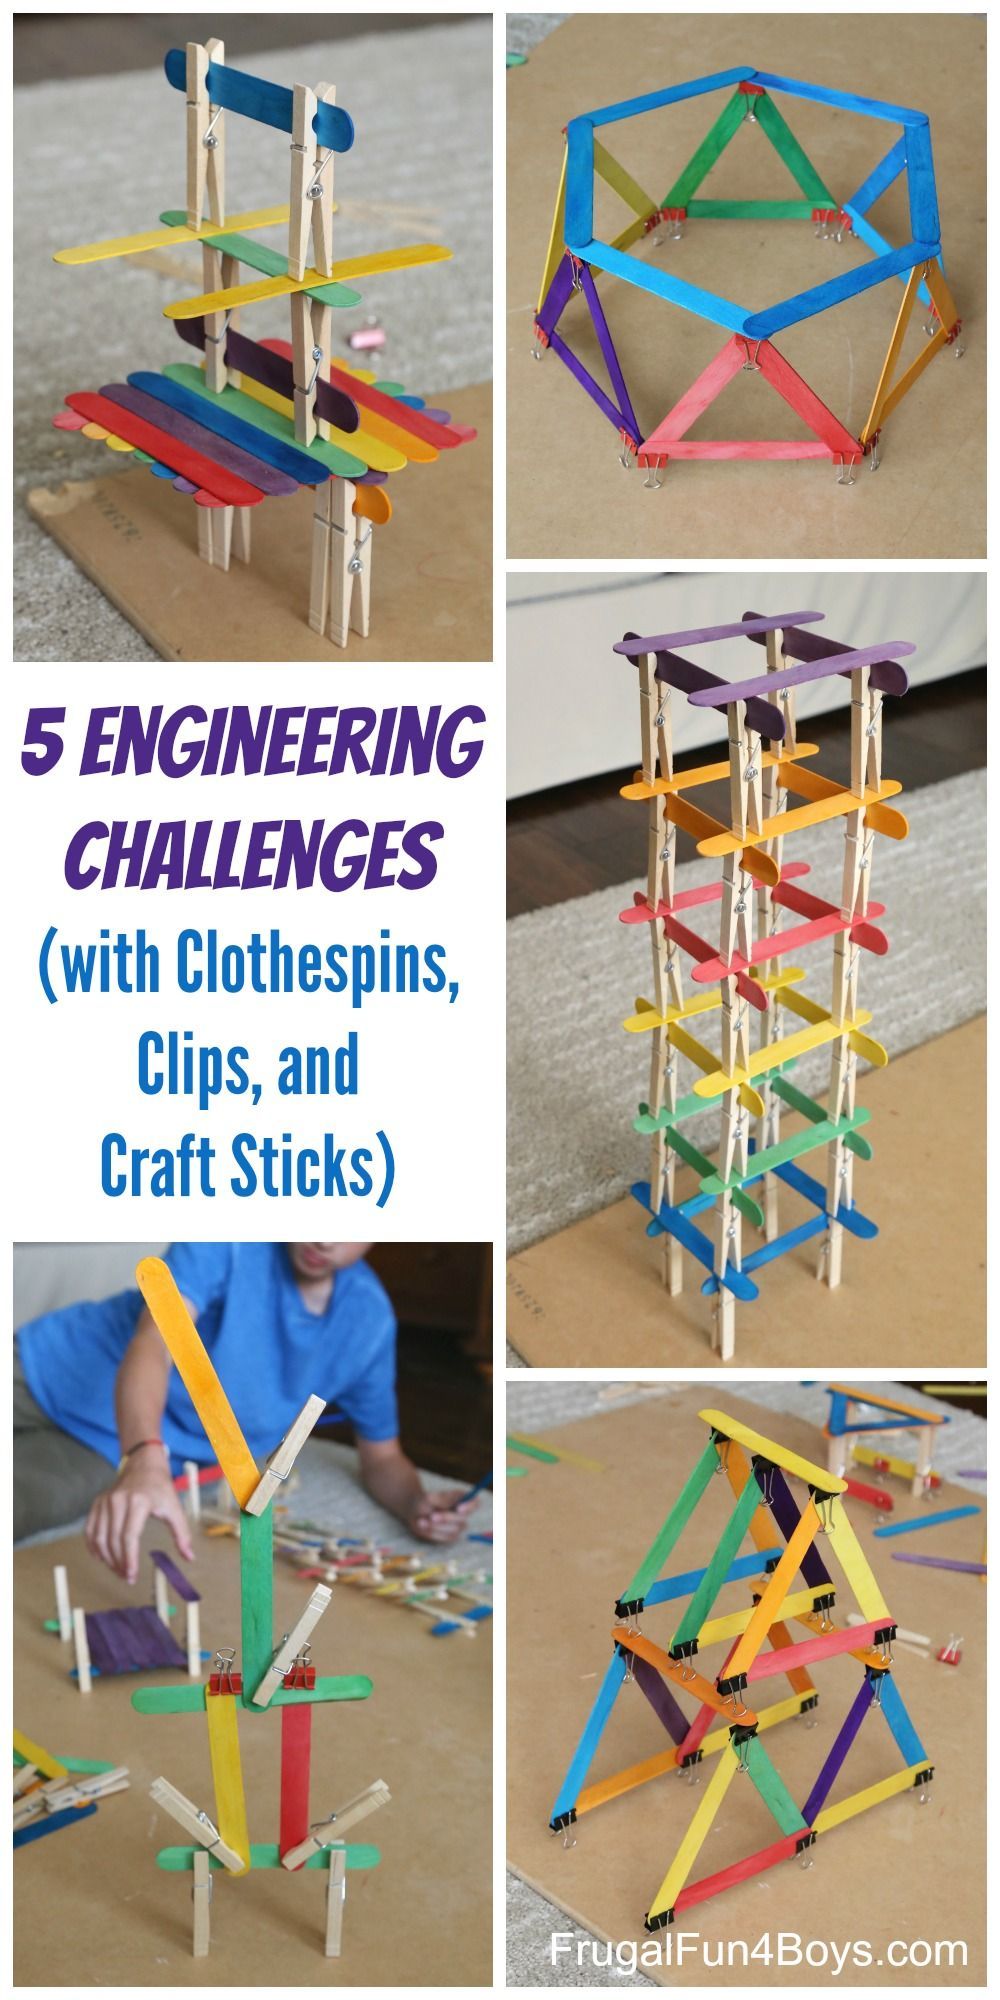 5 Engineering Challenges with Clothespins, Binder Clips, and Craft Sticks.  Awesome STEM activity for